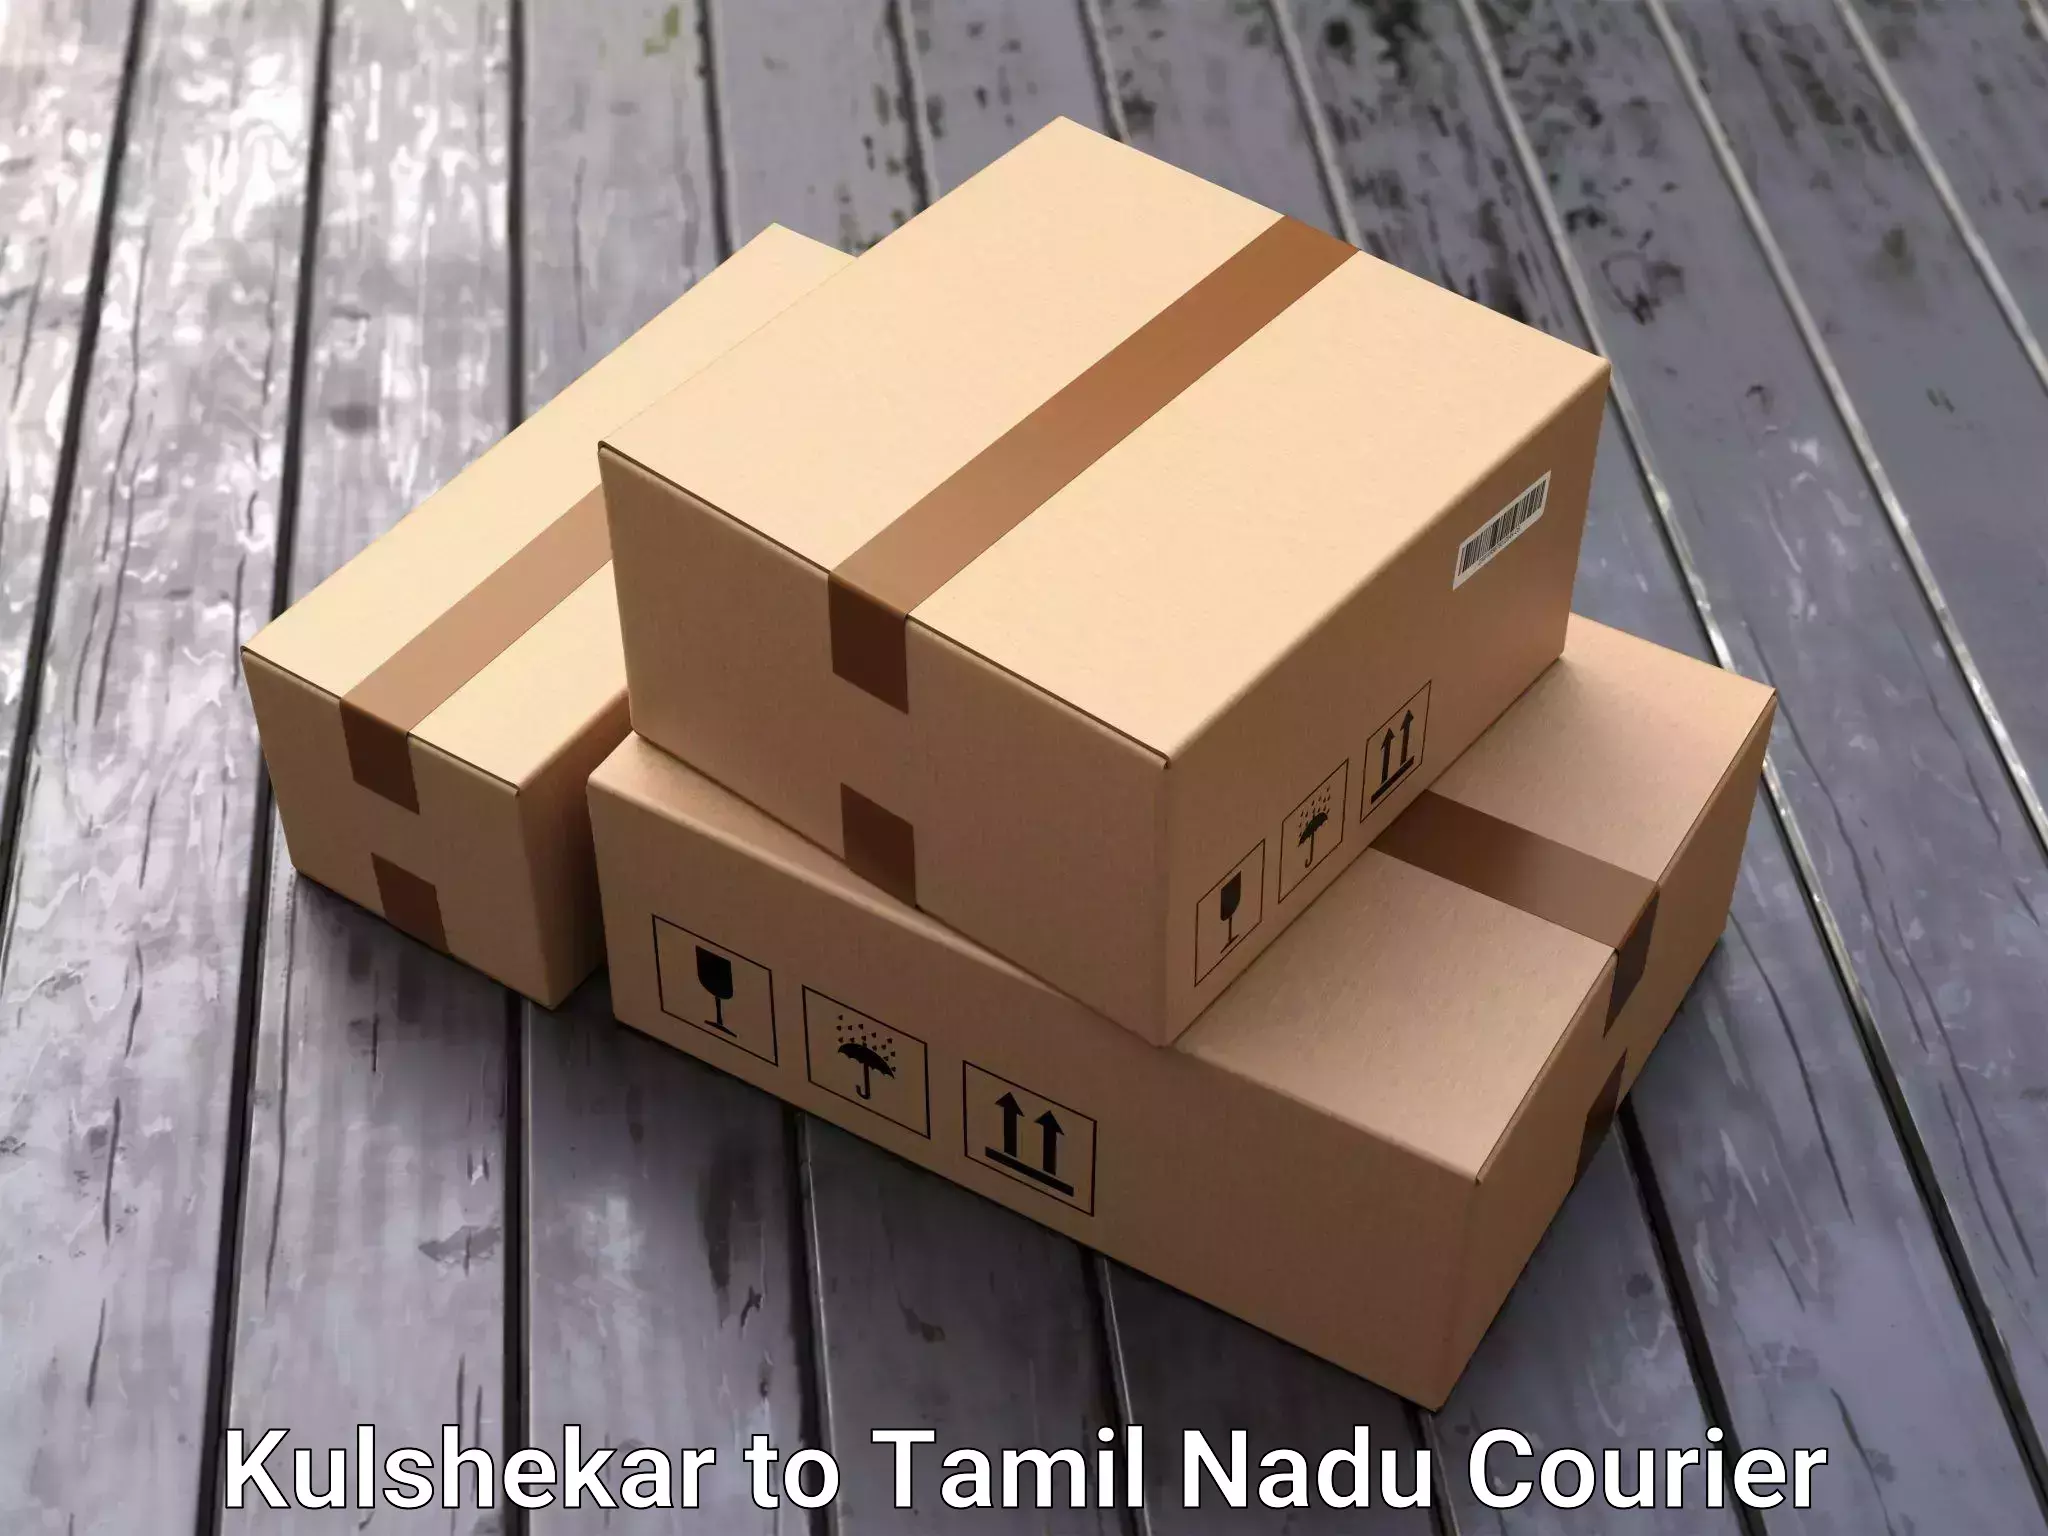 Efficient home movers in Kulshekar to Chennai Port